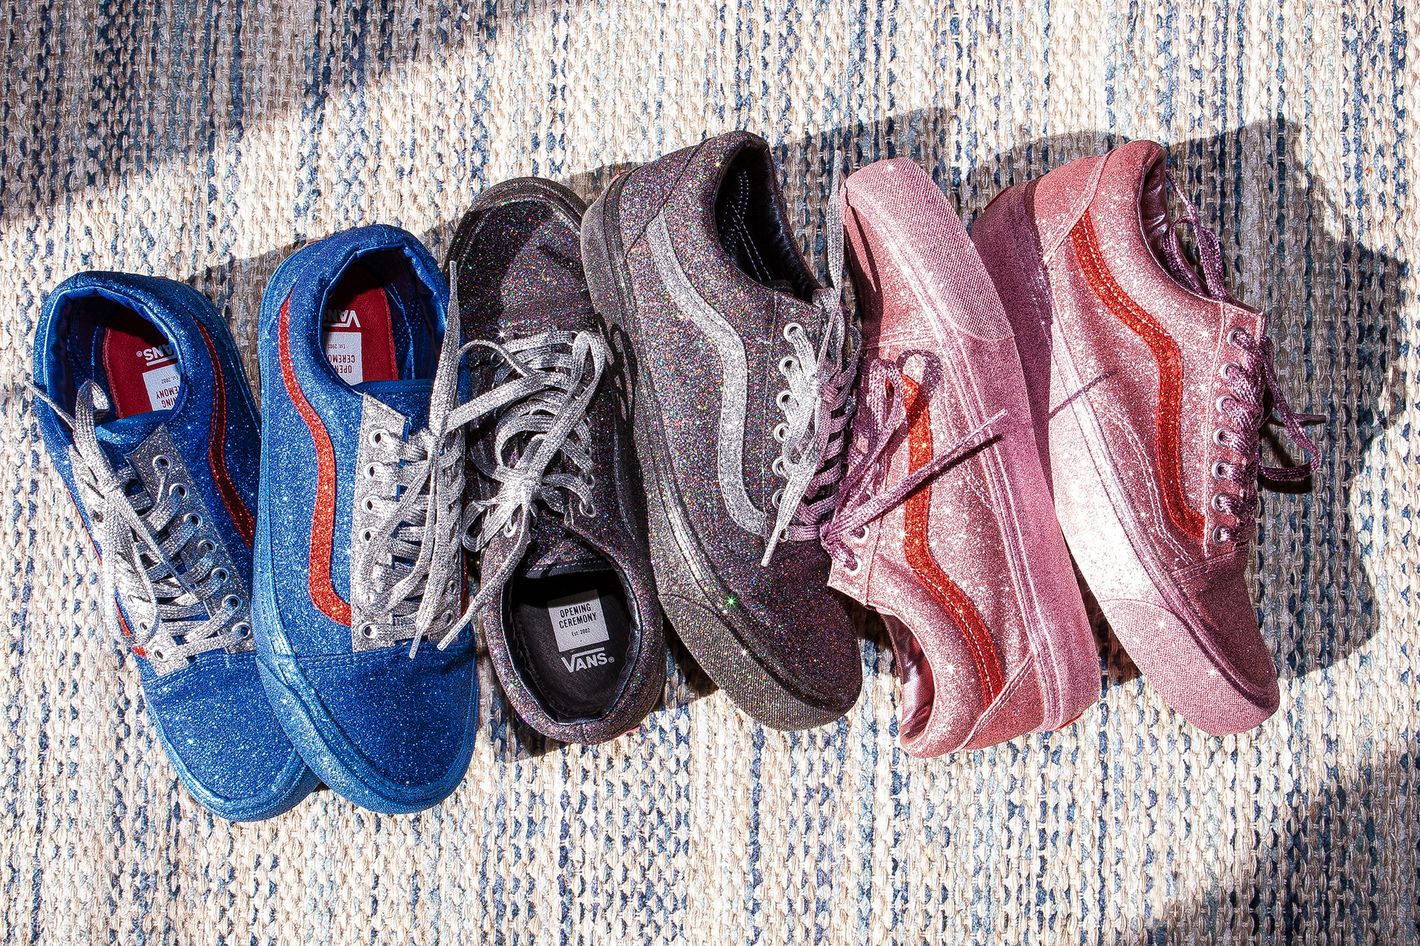 Get the Vans x Sneakers Ceremony: New Now Opening Glittery